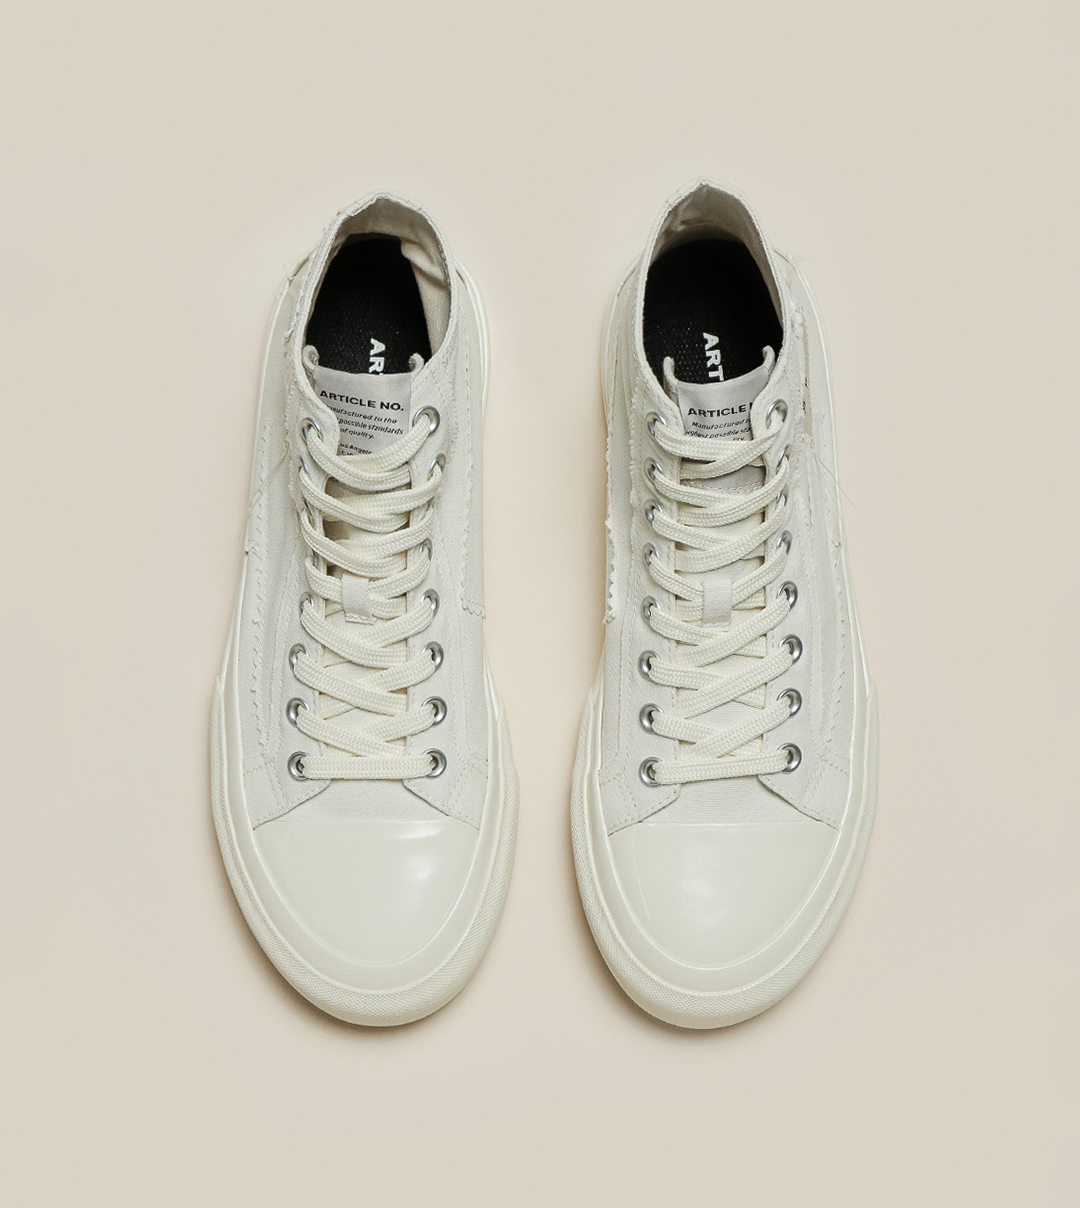 O.G. CLASSIC PATCHWORK HIGH-TOP WHITE SNEAKERS